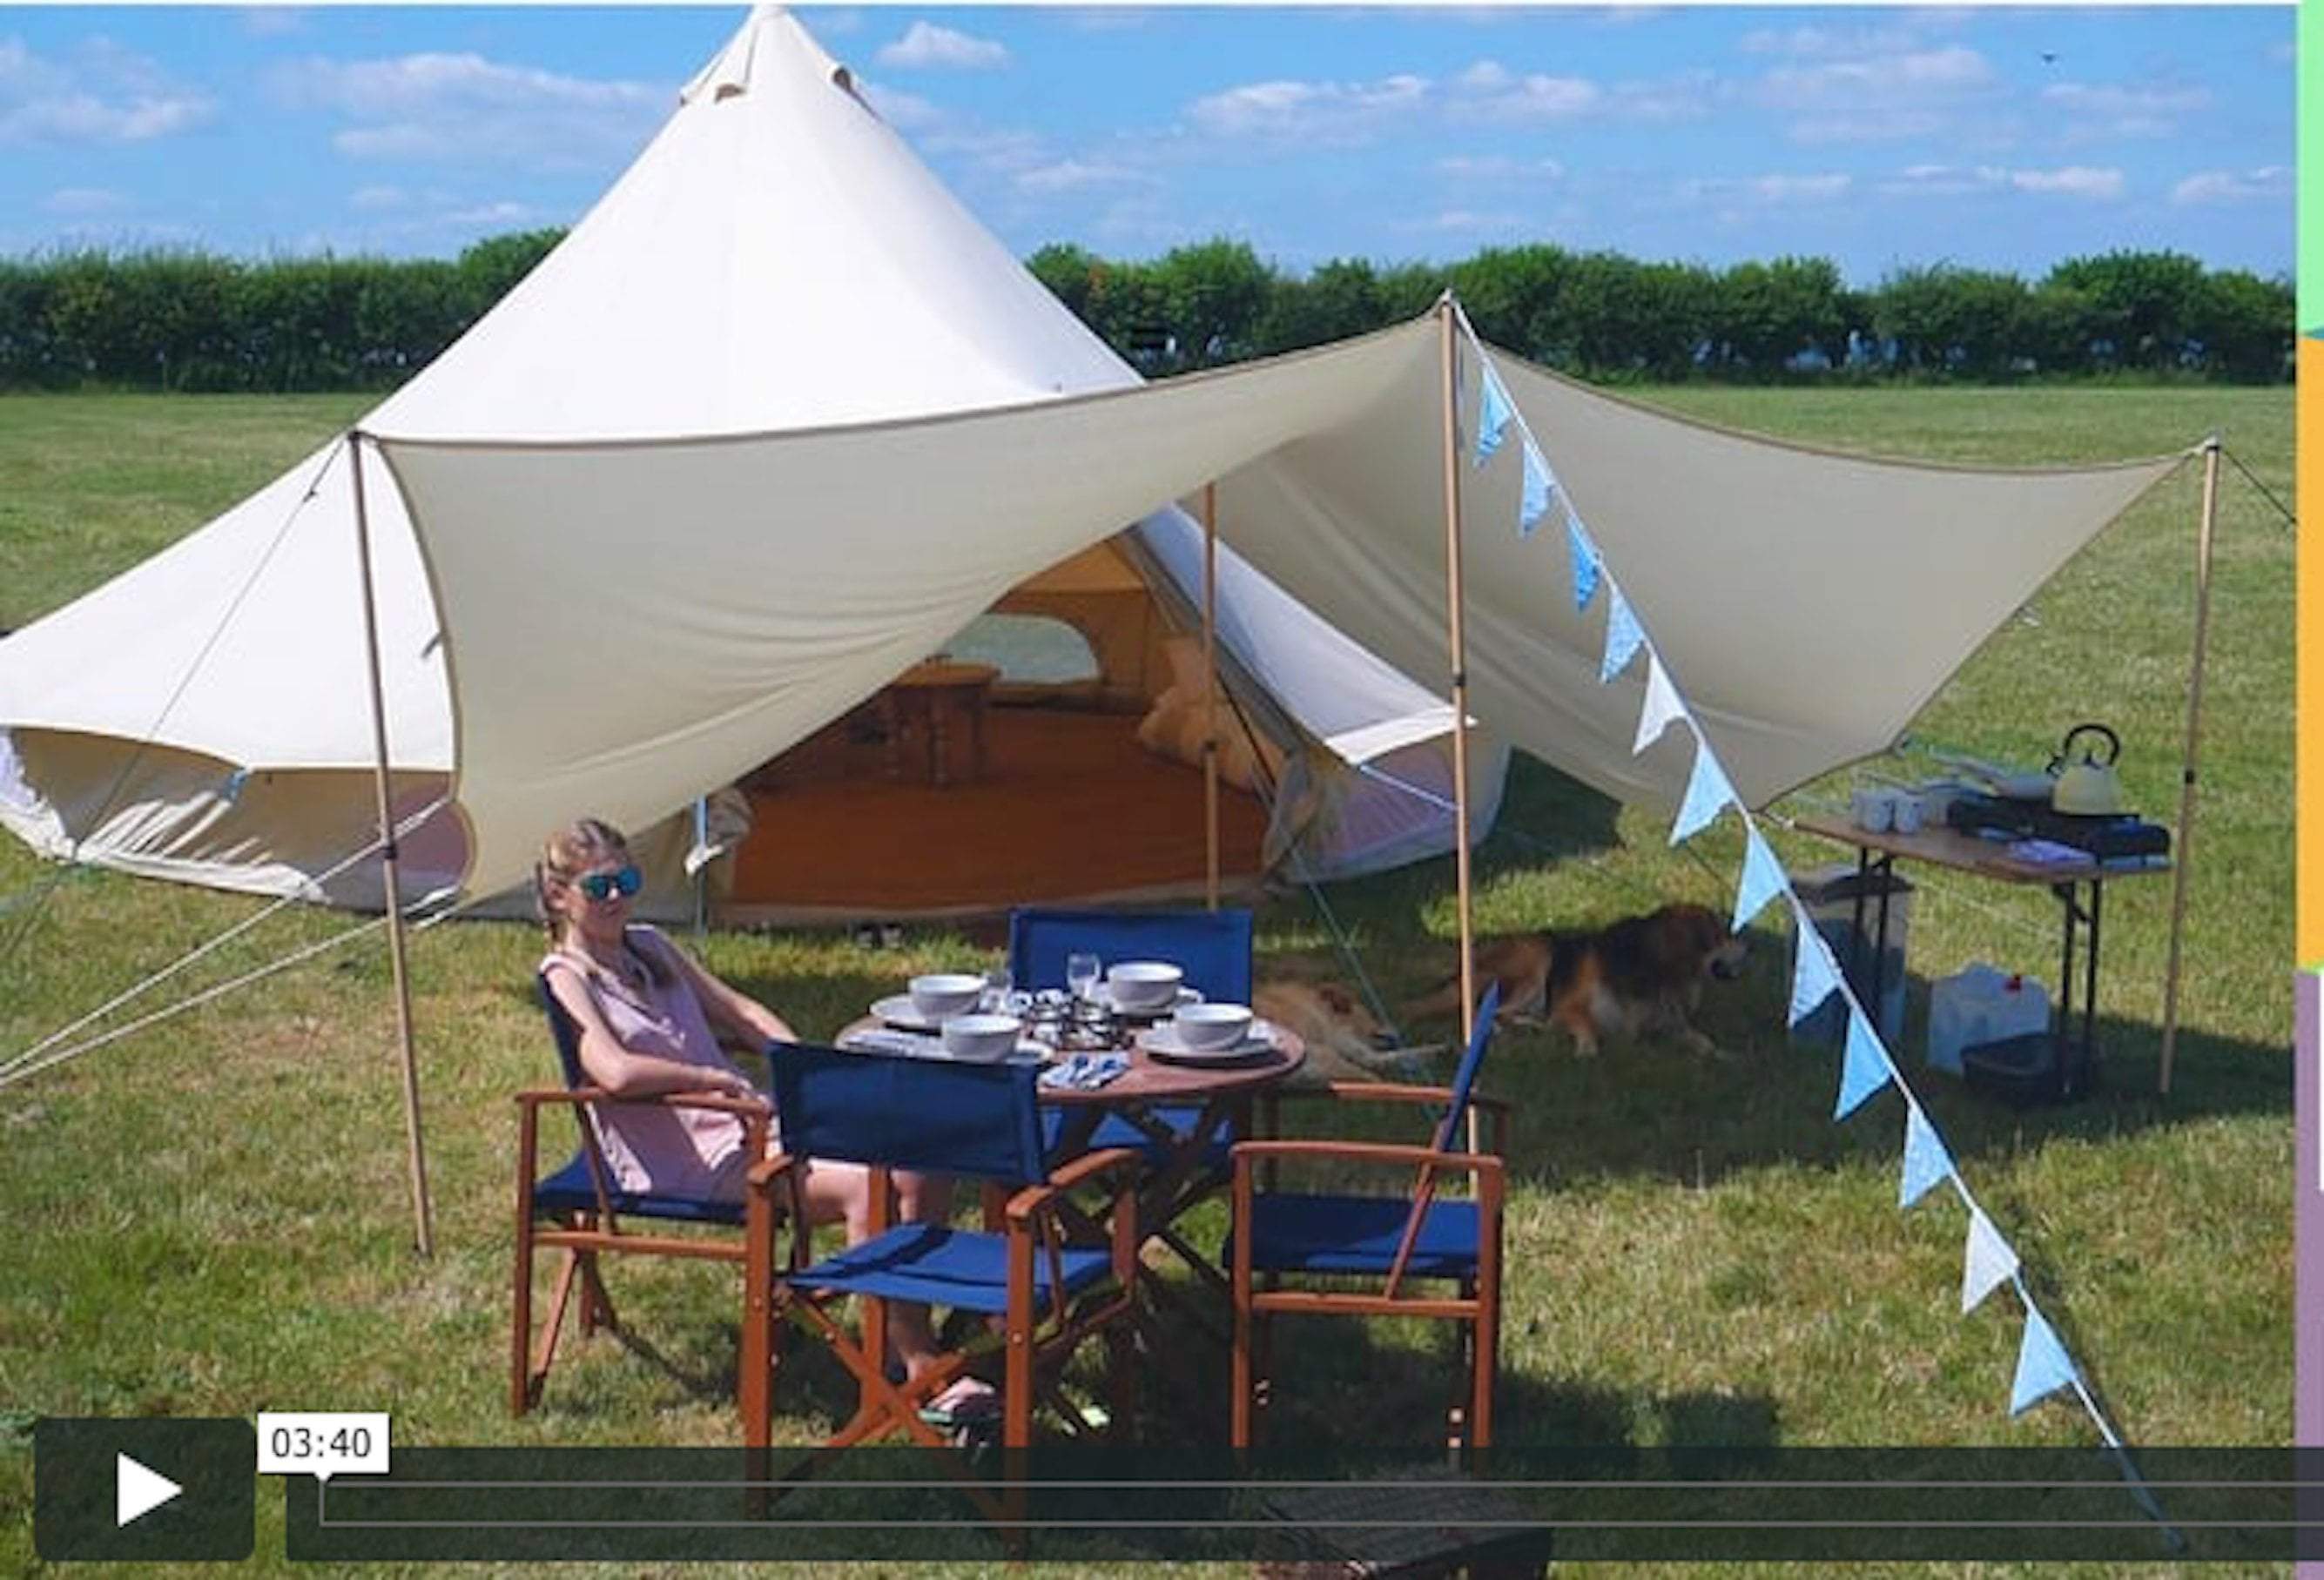 How to set up and pack away a bell tent – Bell Tent Set Up